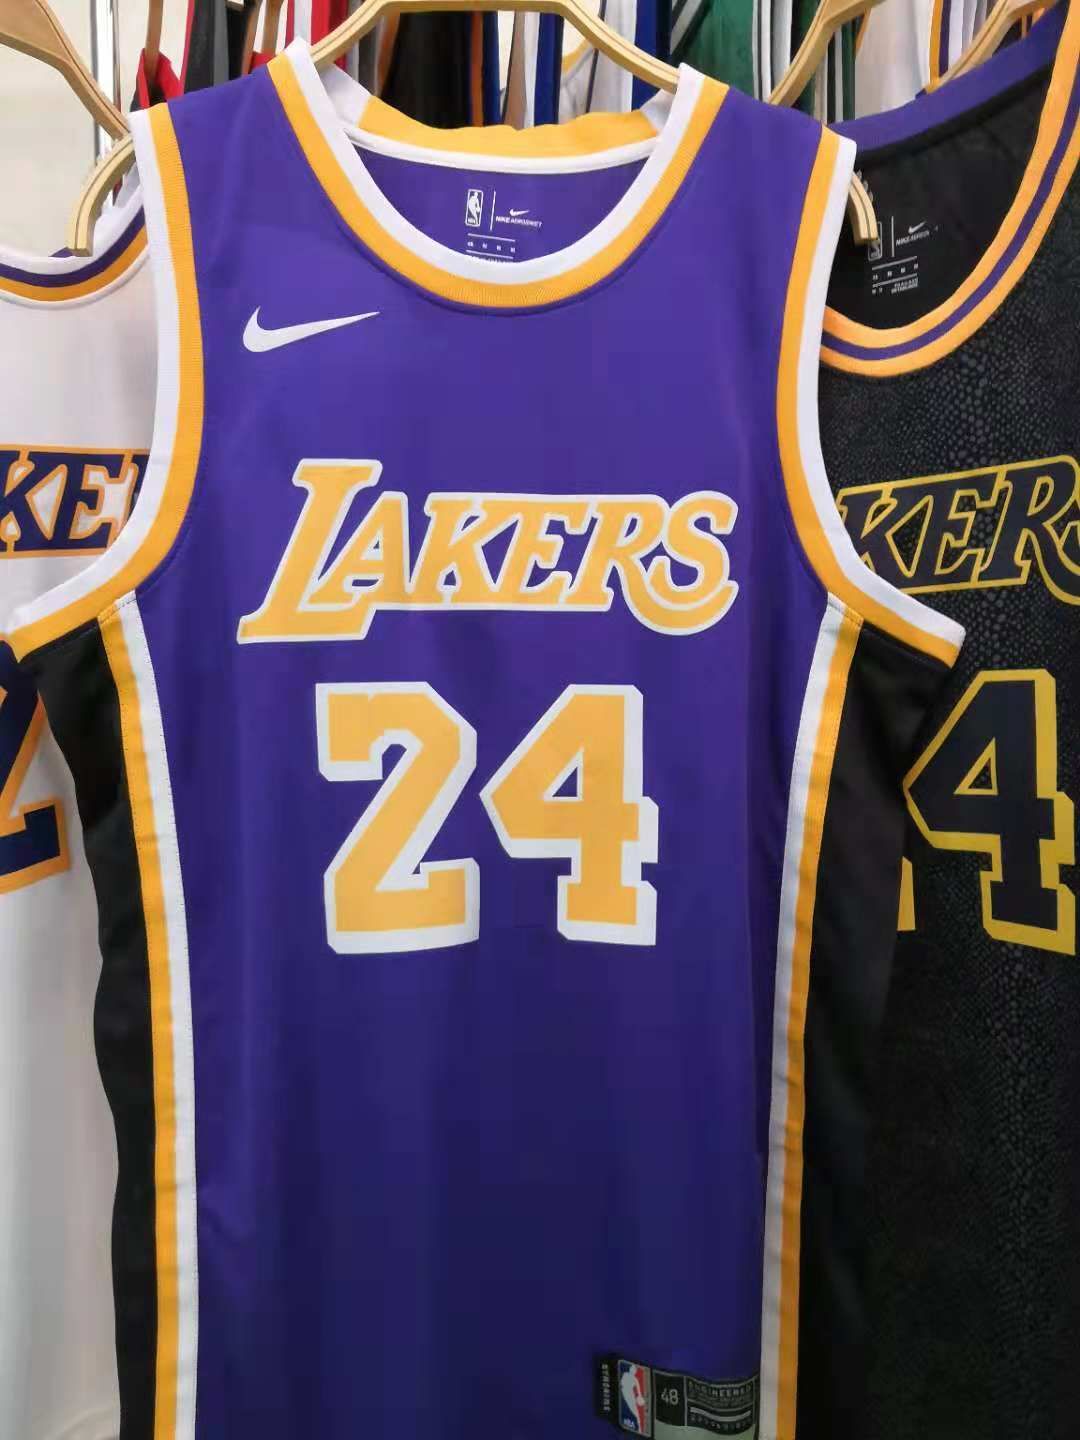 dhgate lakers jersey